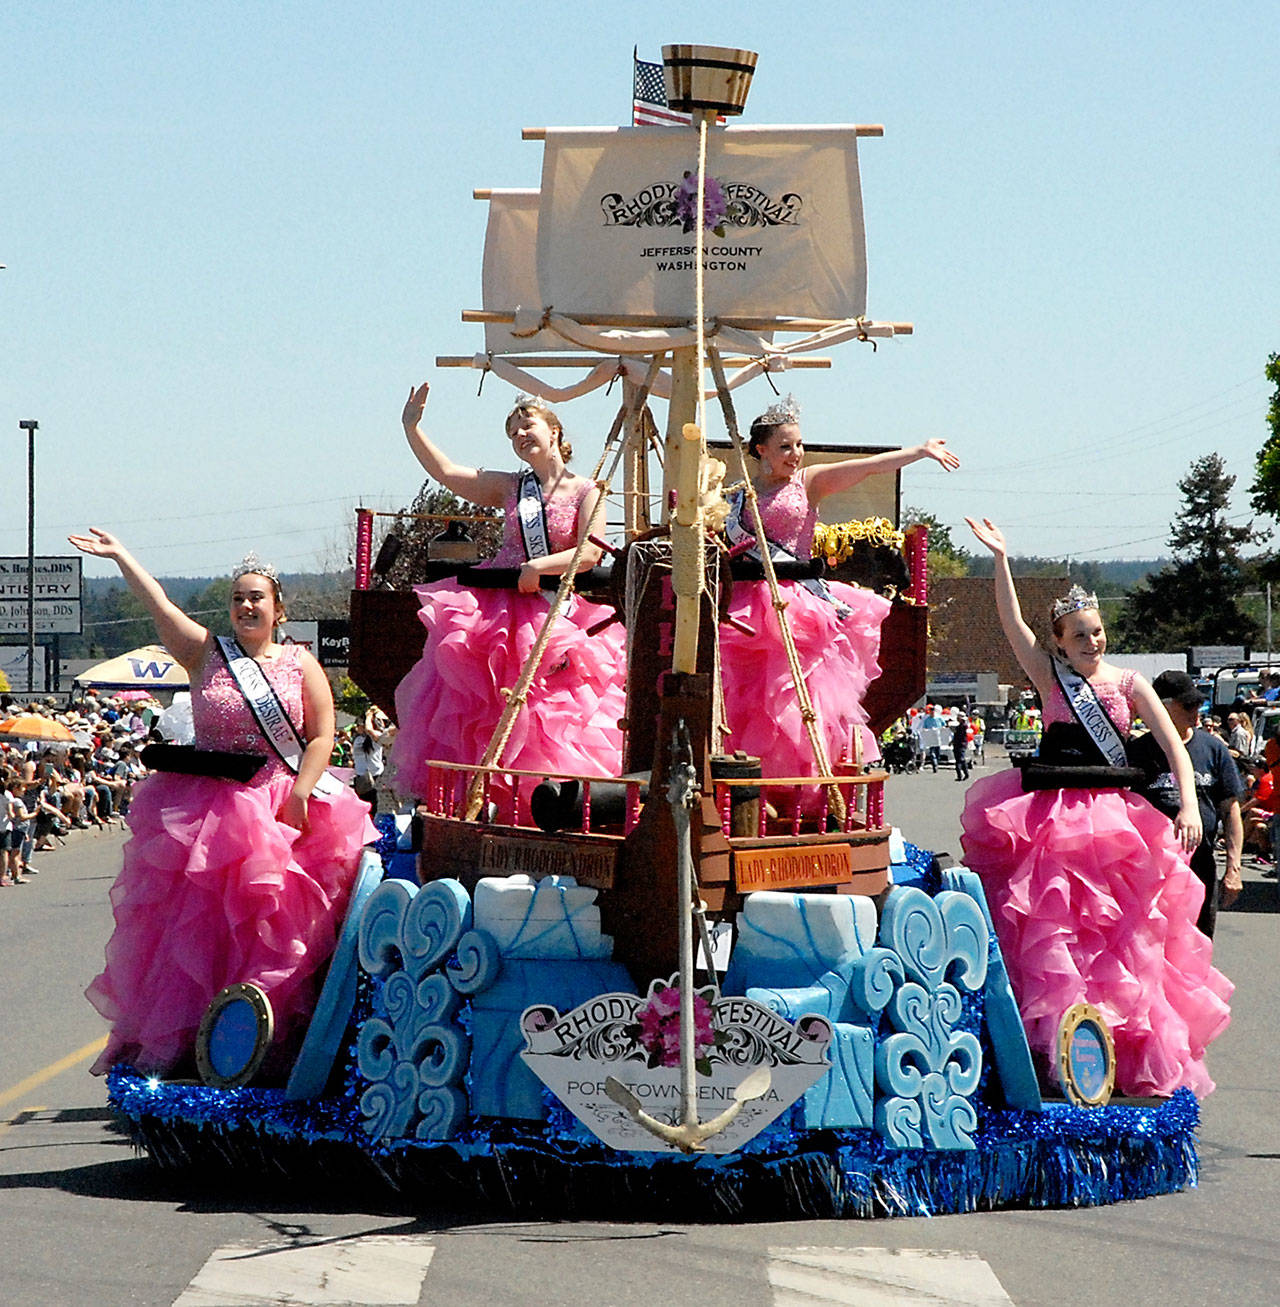 The Port Townsend Rhody Festival float with royalty, from left, princesses Desirae Kudronowicz and Skyanna Iardella, Queen Ashley Rosser and Princess Lacey Bishop takes part in the Irrigation Festival Grand Parade in Sequim. (Keith Thorpe/Peninsula Daily News)